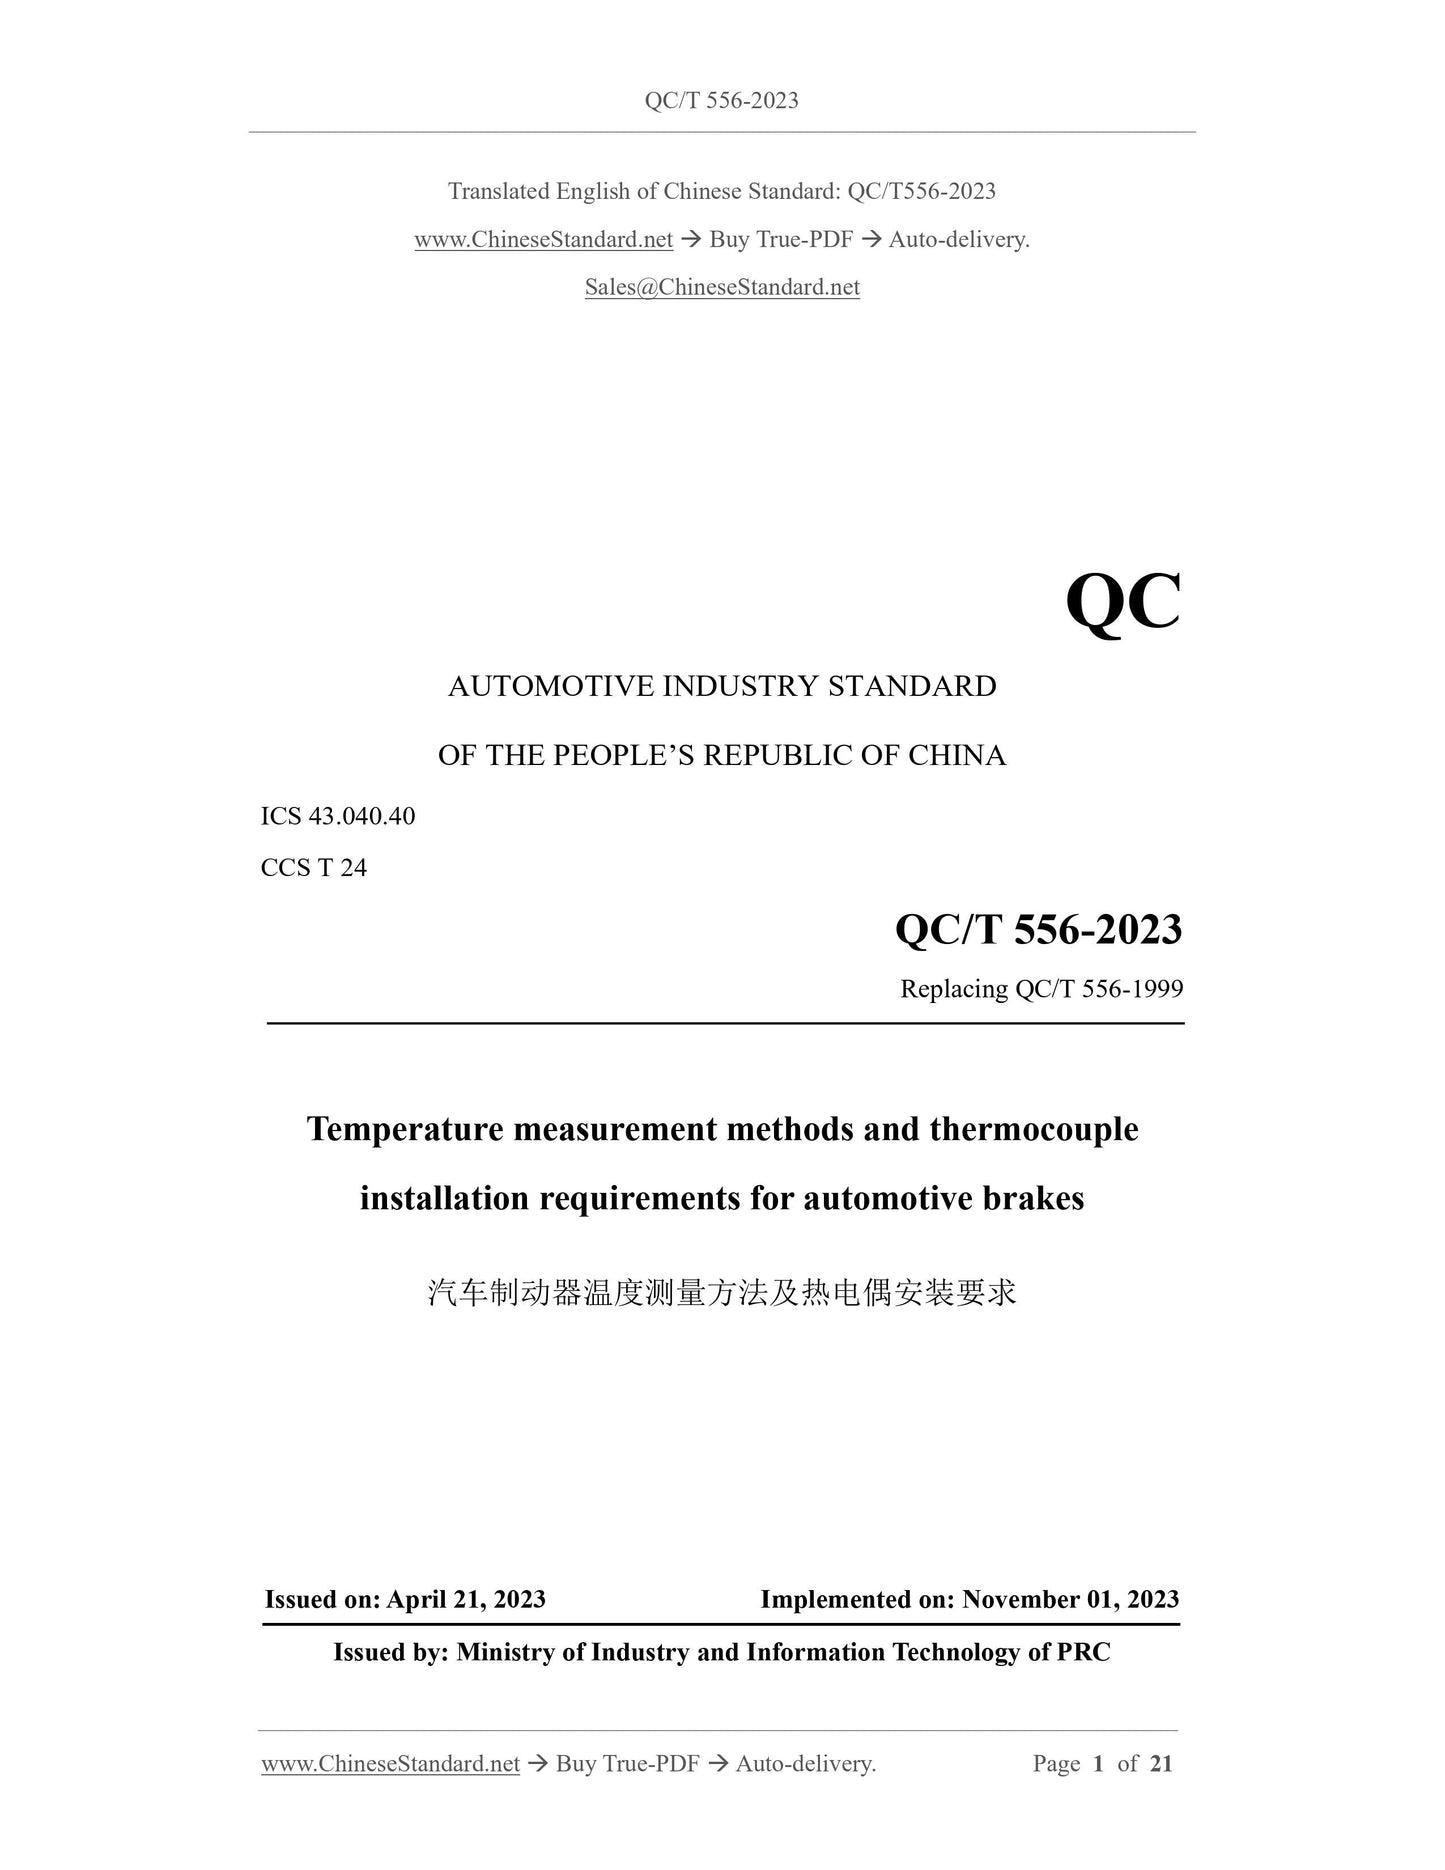 QC/T 556-2023 Page 1